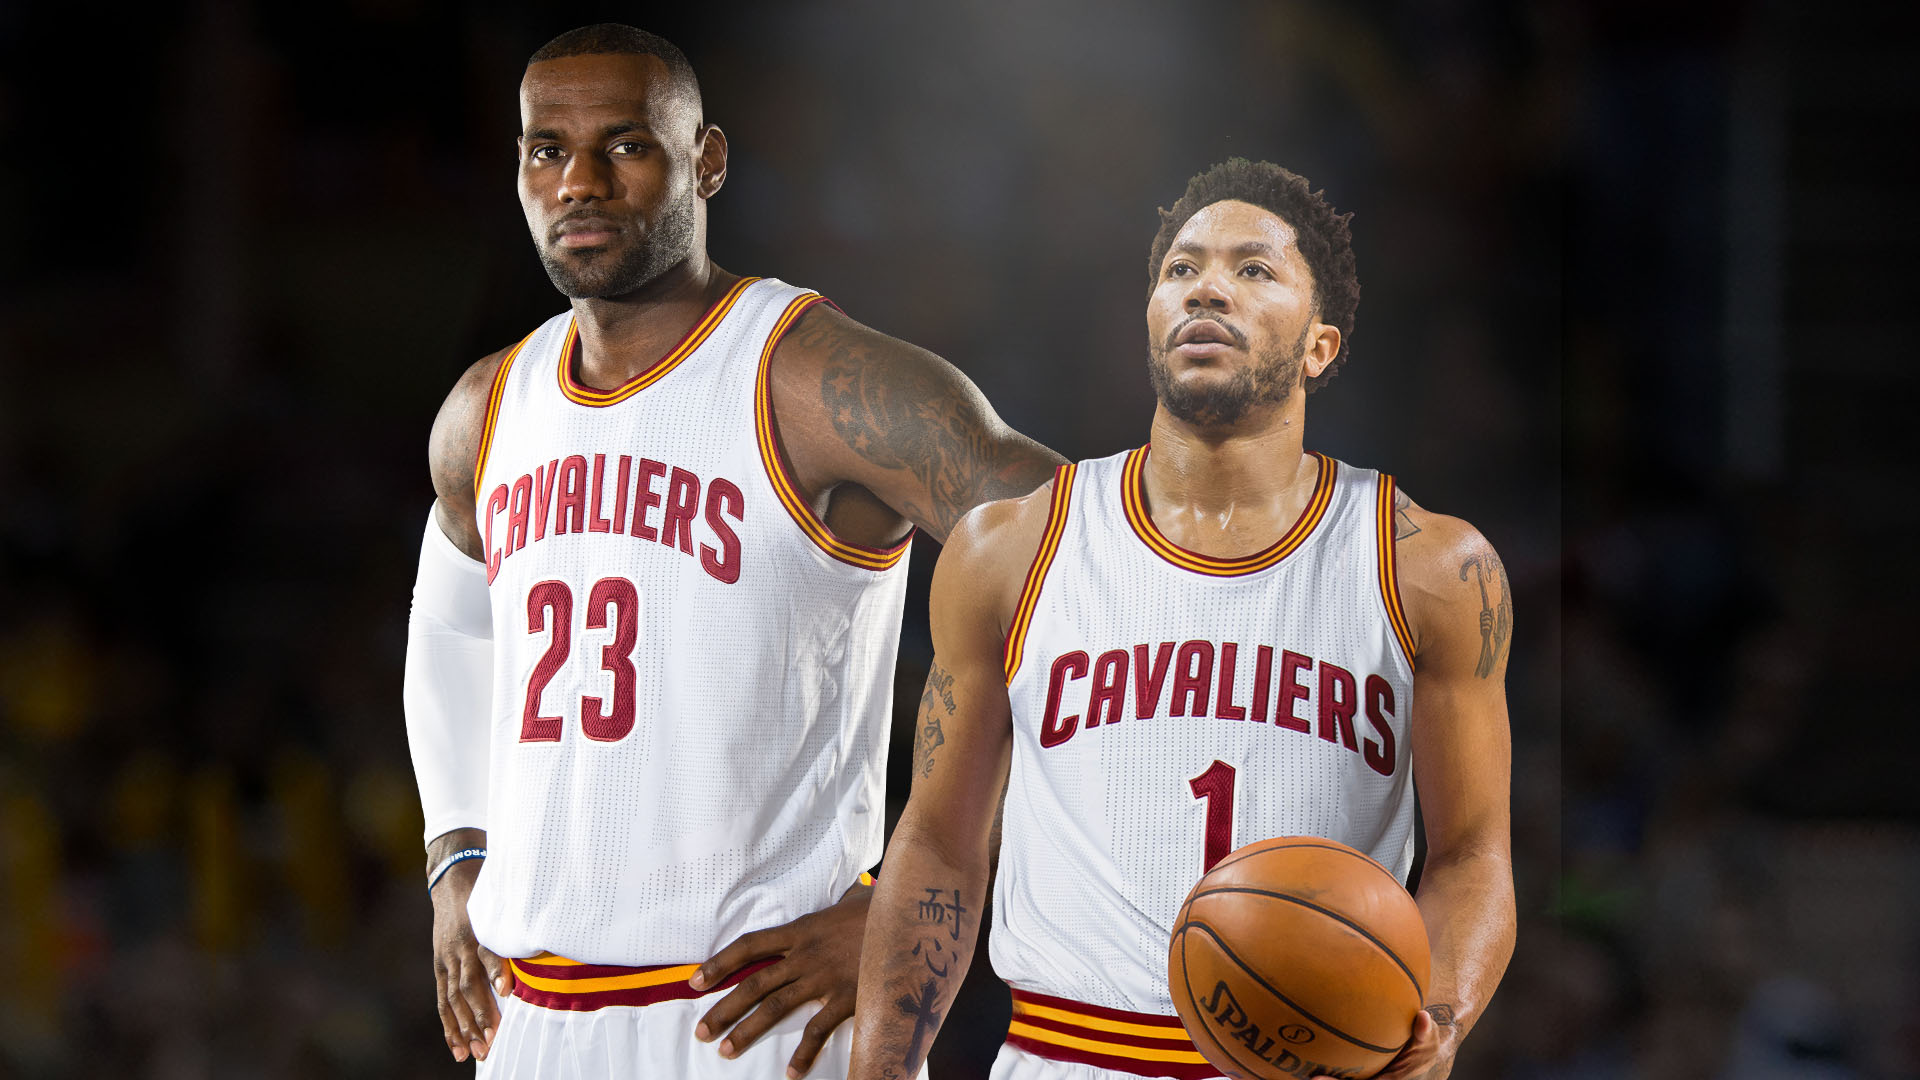 Report: Derrick Rose commits to sign with Cleveland Cavaliers